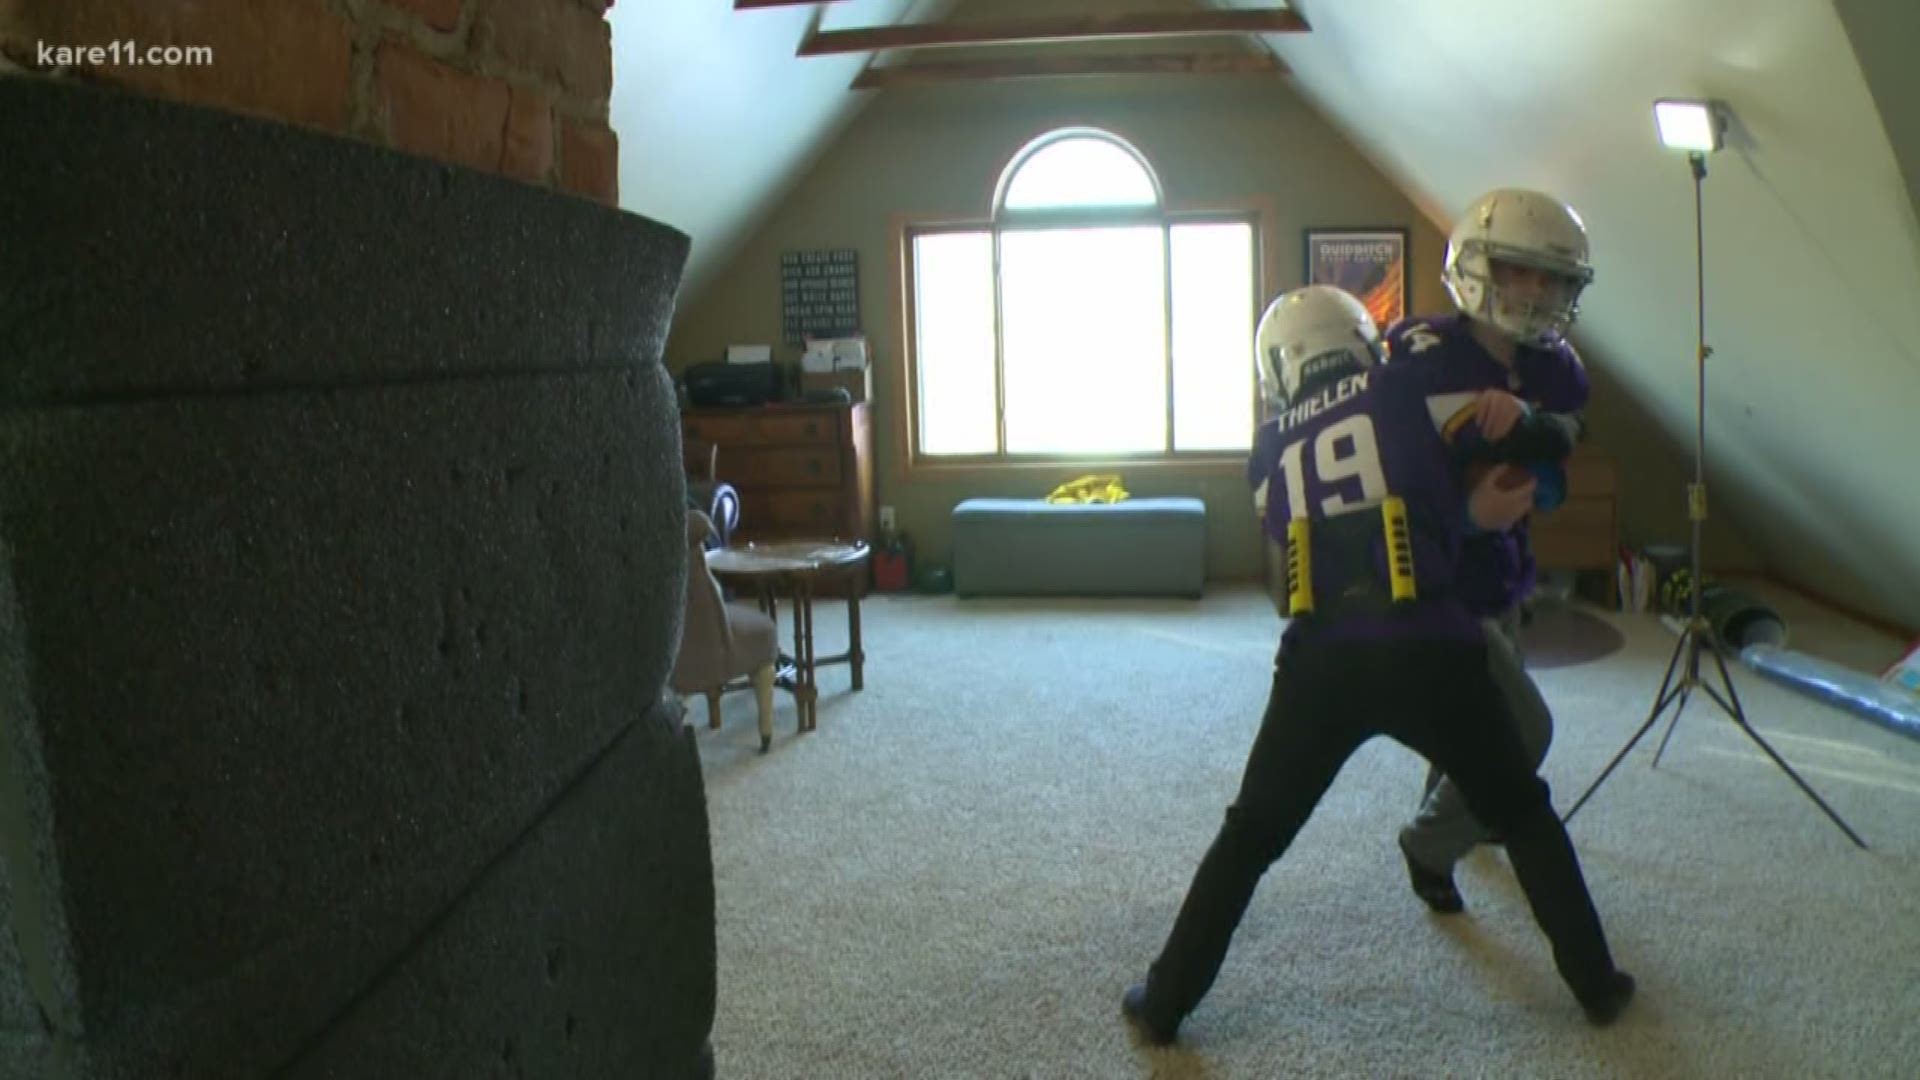 The St. Paul-based company TackleBar is a finalist in the Fourth Annual NFL 1st and Future competition. https://kare11.tv/2UviaKv